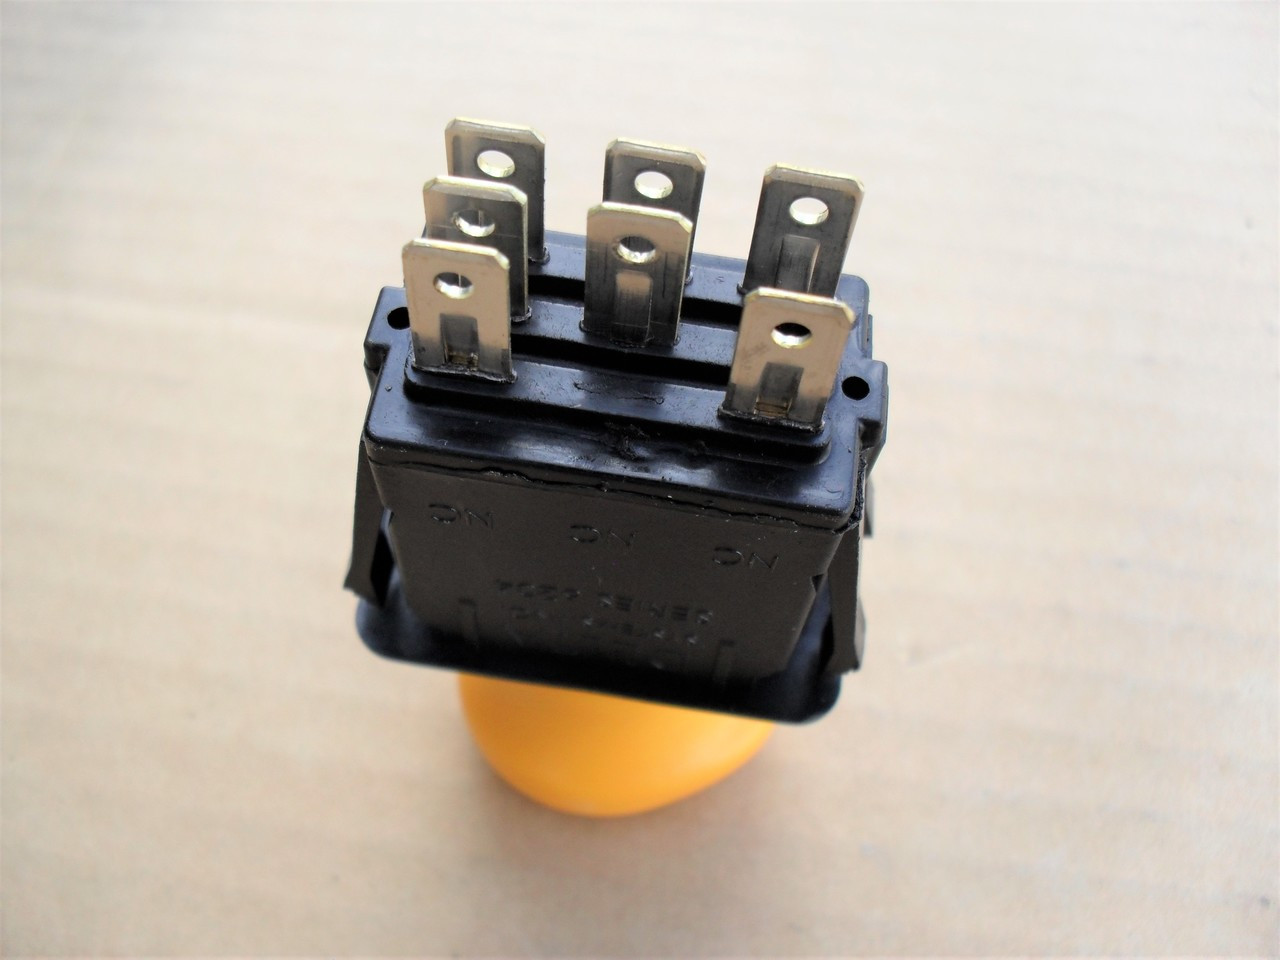 PTO Switch for Cub Cadet 1515 1517 1525 1527 1529 2130 2135 2140 2145 2146 2150 2155 2160 2164 2165 2166 2176 2185 2186 2206 2518 364 365 365L GT2186 GT2521 GT2523 GT2544 GT2550 725-3233 725-3233A 925-3233 925-3233A